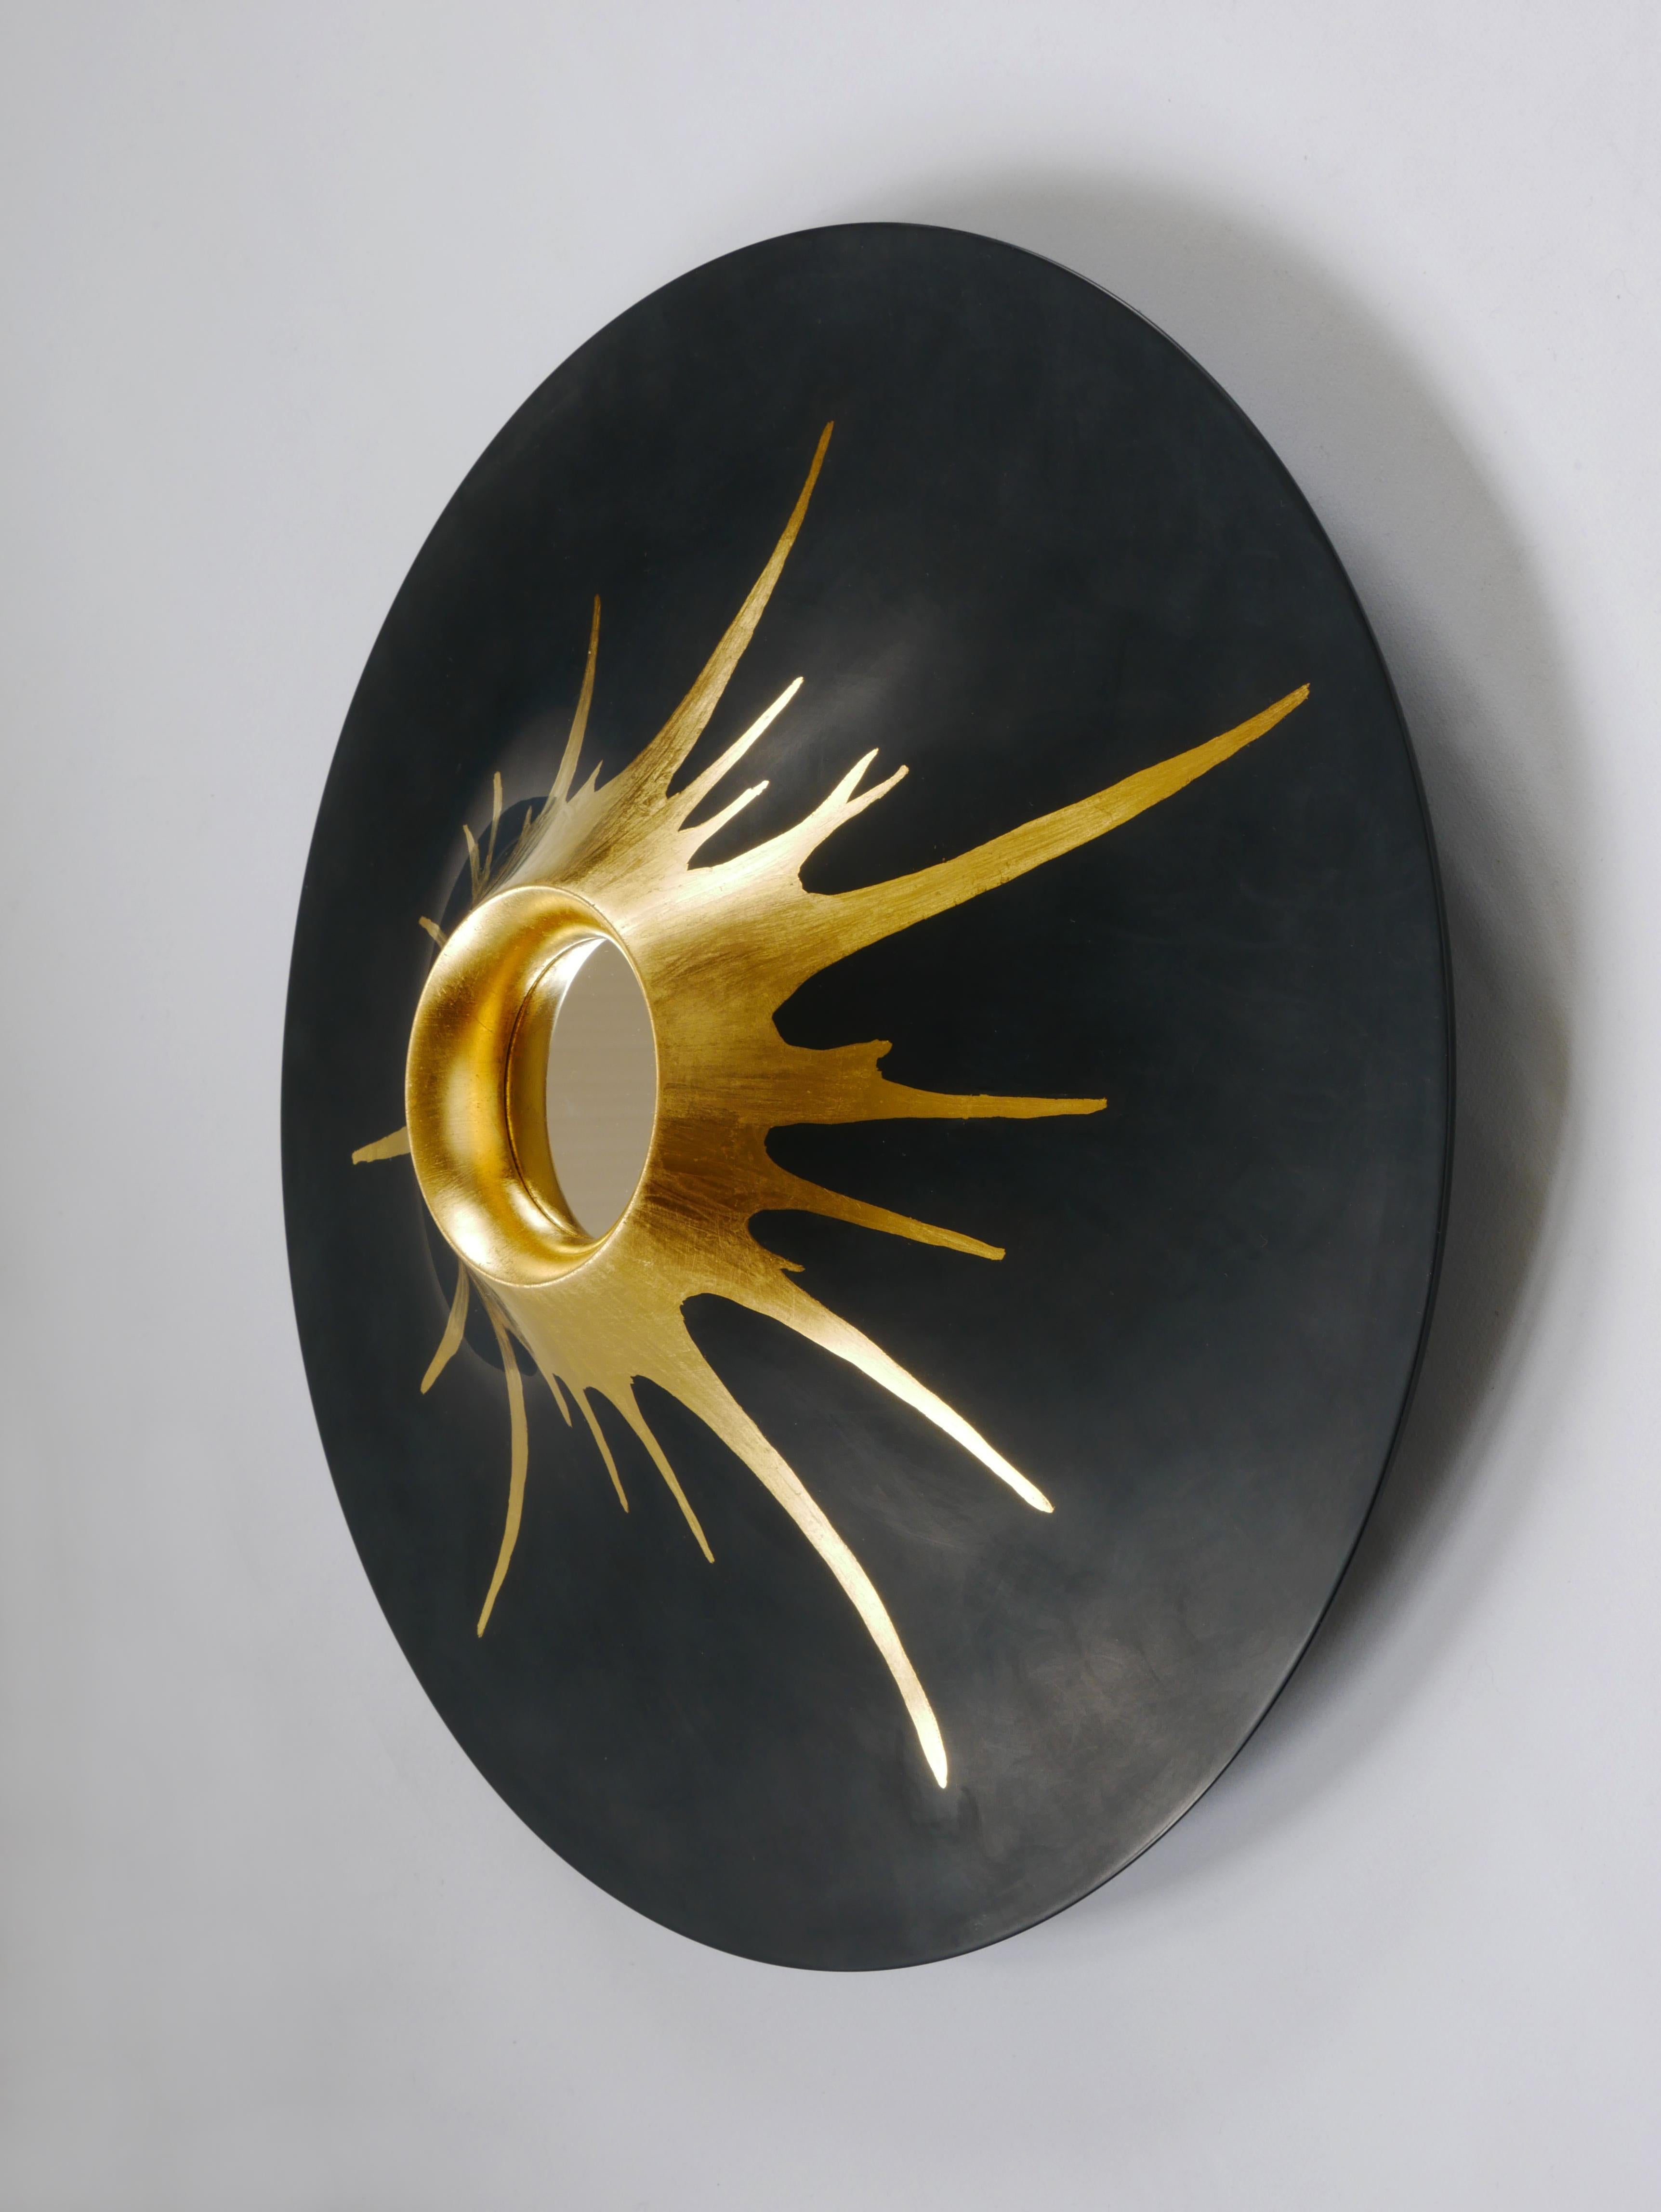 Wall mounted mirror sculpture in the shape of a volcano. Made of lime tree and gold leaf with a 60 mm polished steel mirror. Golden lava flows from the crater (mirror) over the black lacquered wood. Influenced by early 20th century masters such as